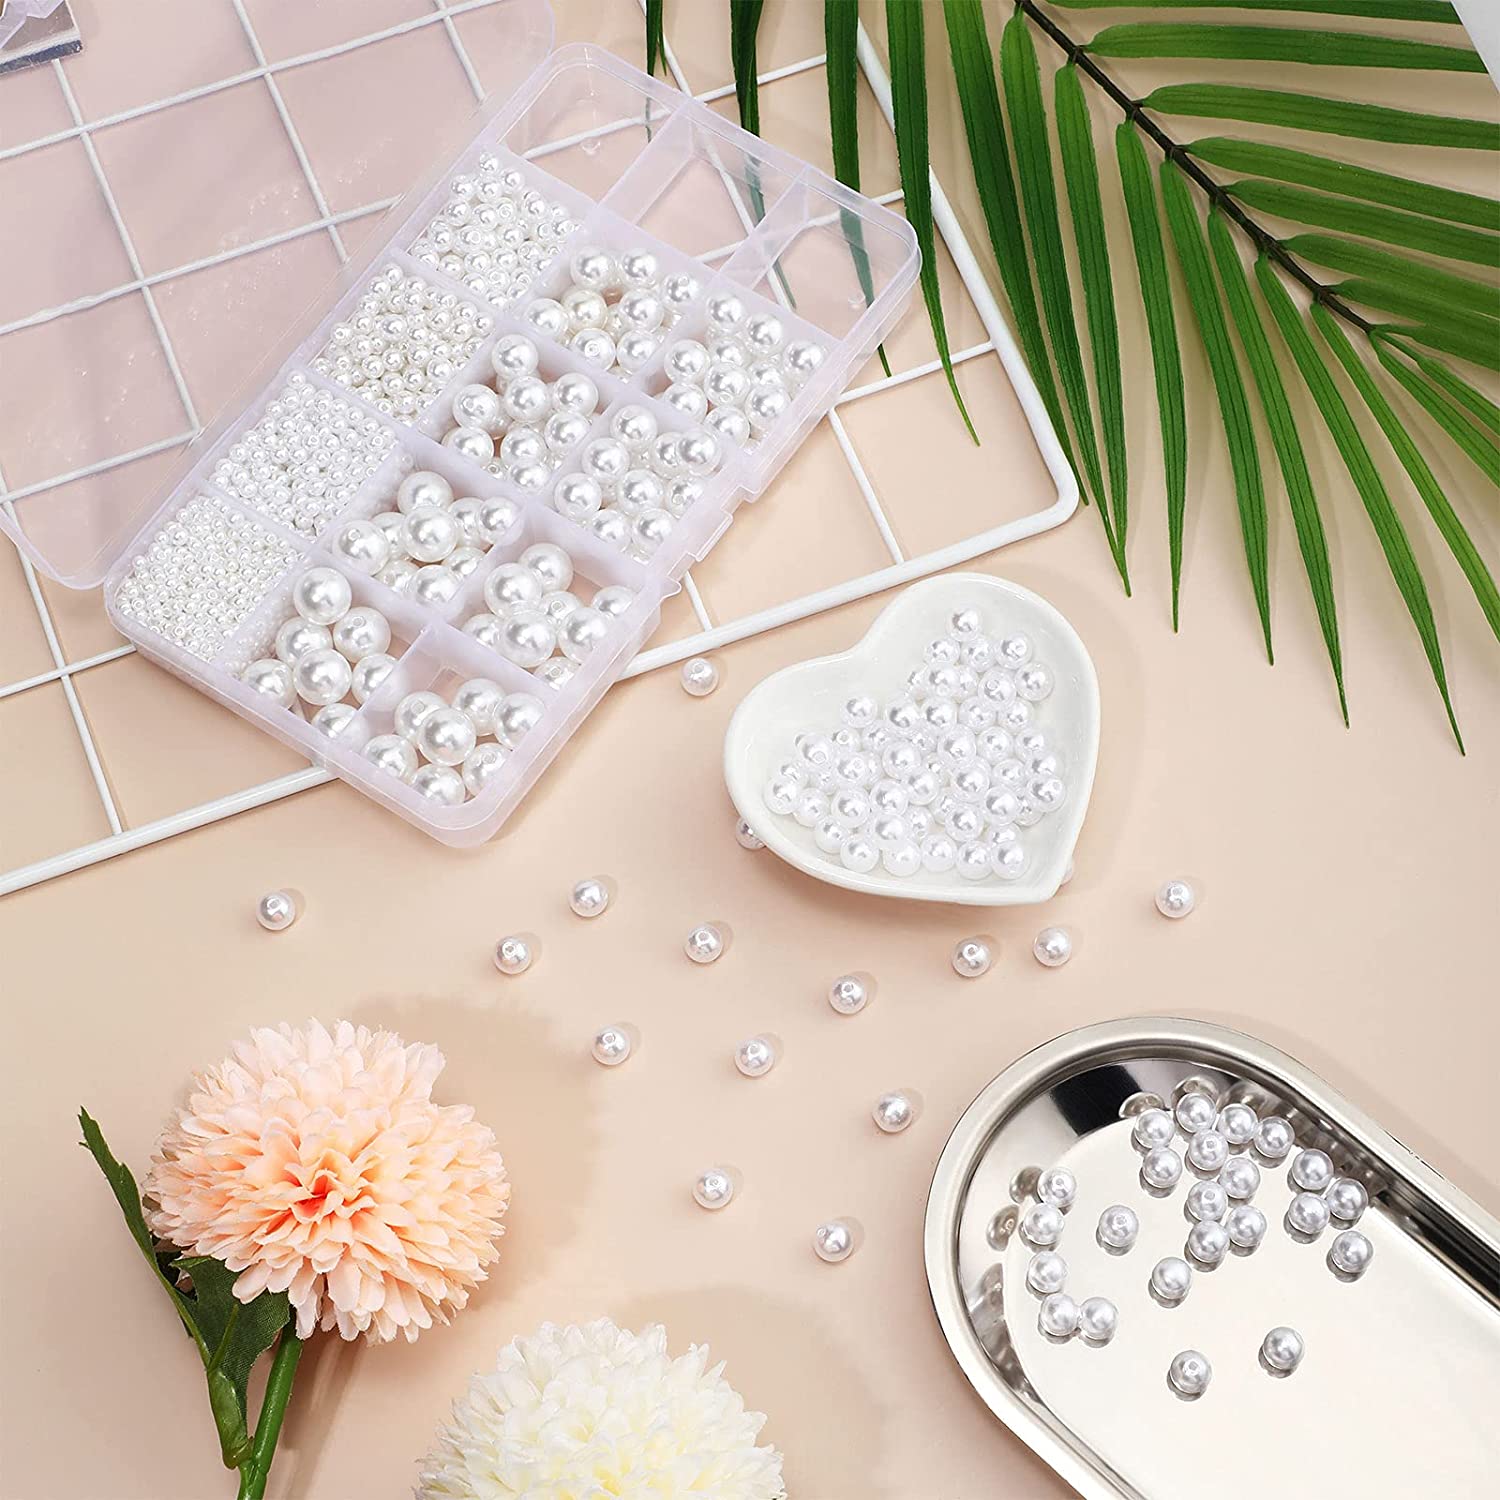 Pearl Beads for Jewelry Making Caffox 1680PCS Round Glass Pearls Beads with  Holes for Making Earring